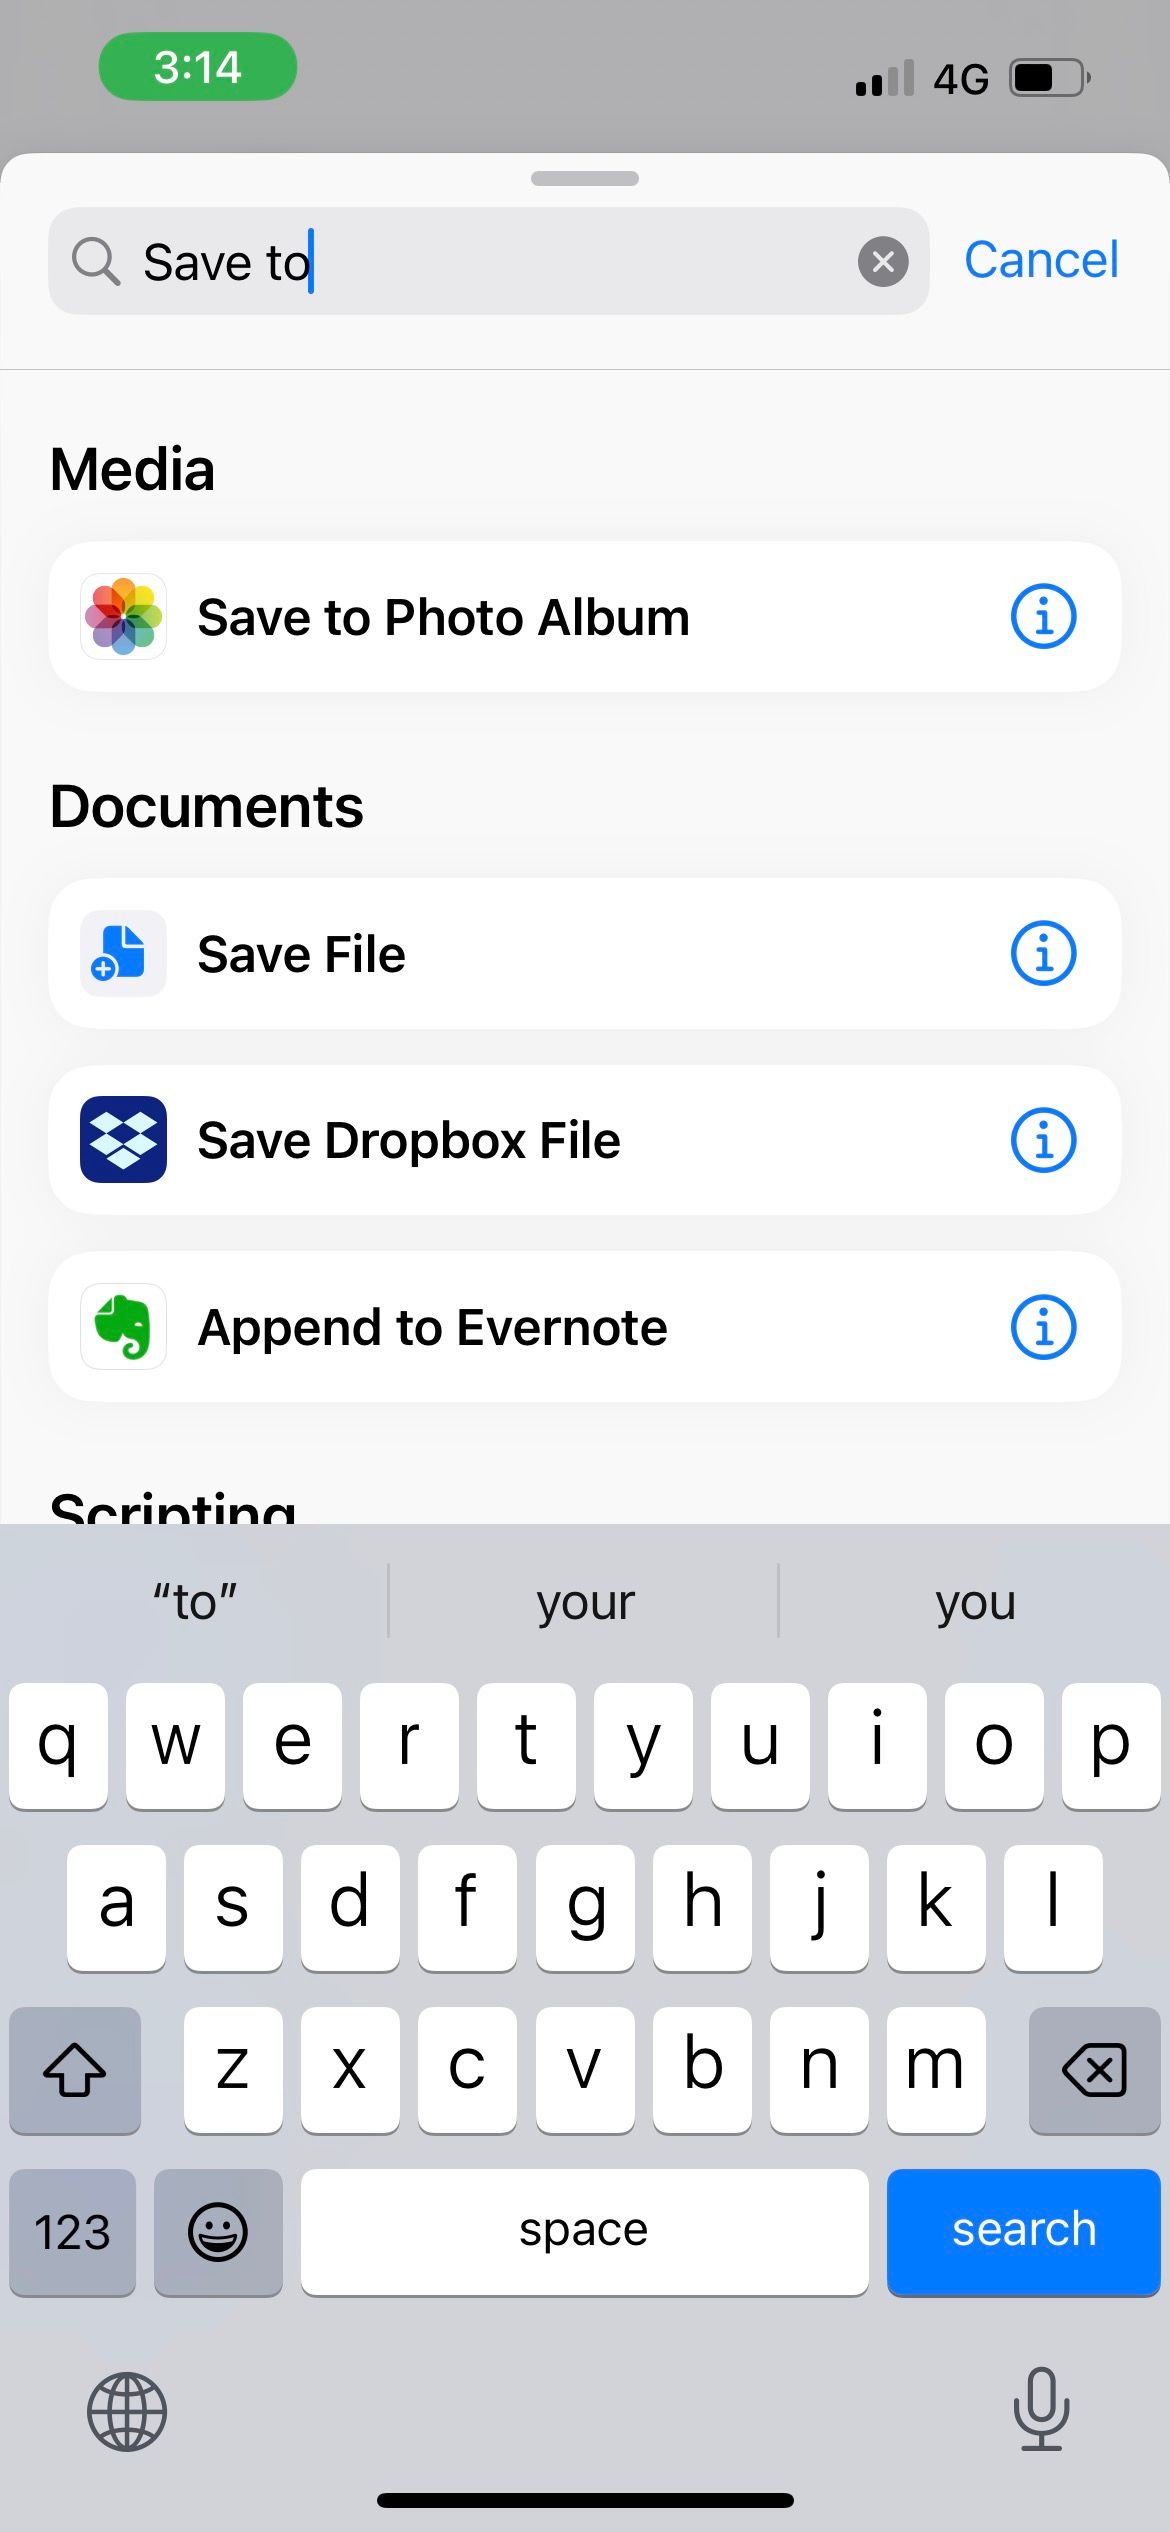 save to photo album action in iphone shortcut